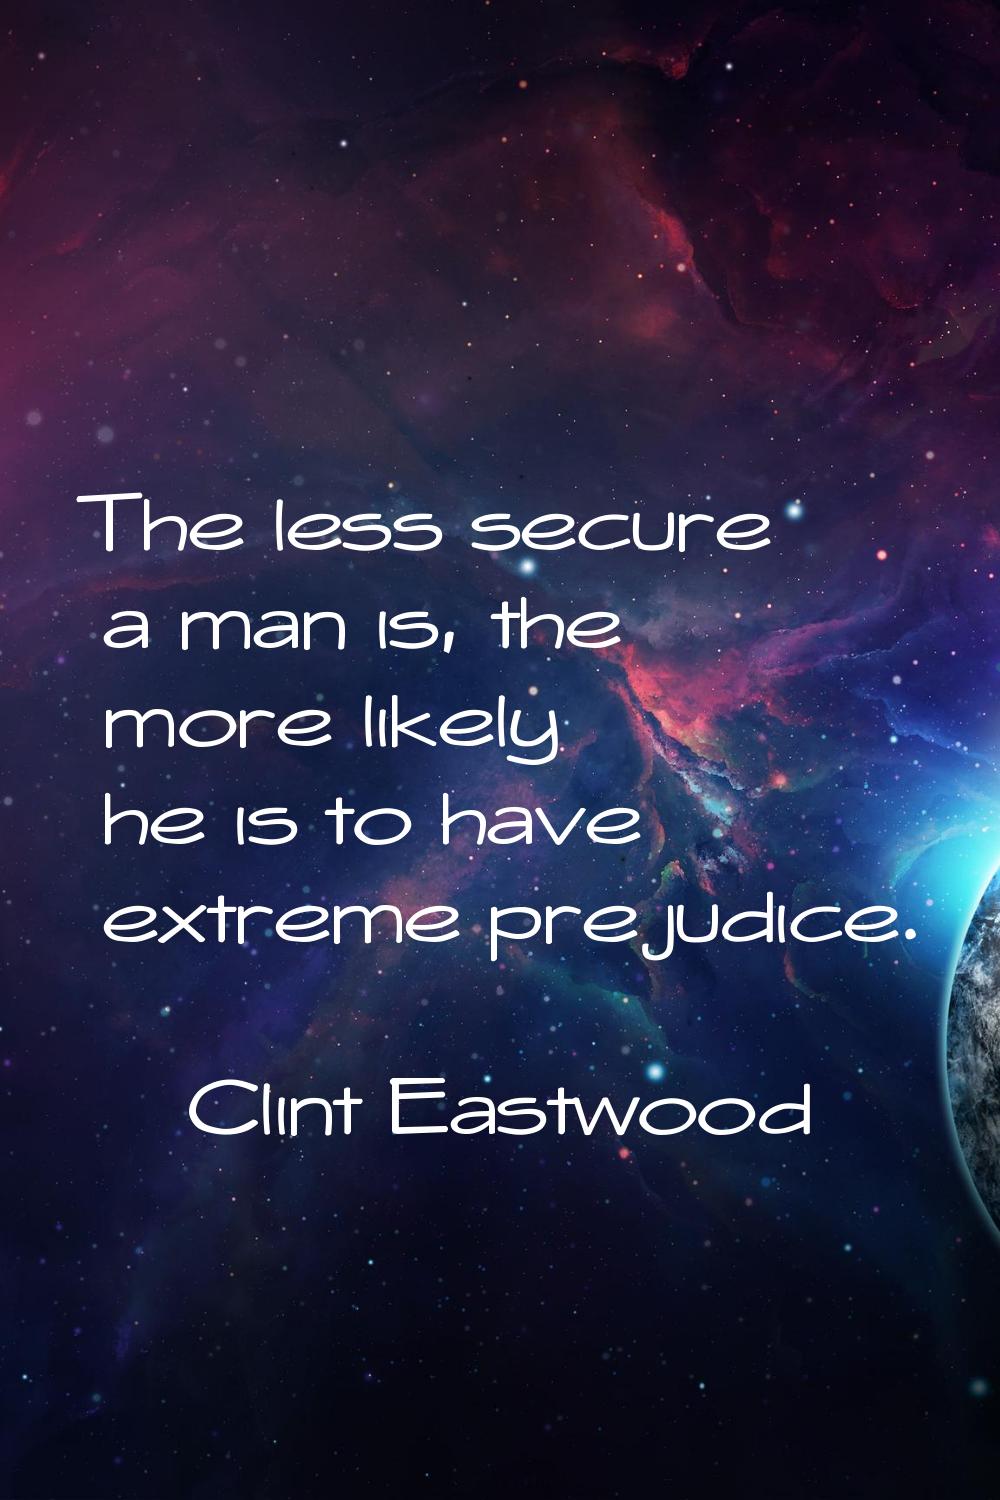 The less secure a man is, the more likely he is to have extreme prejudice.